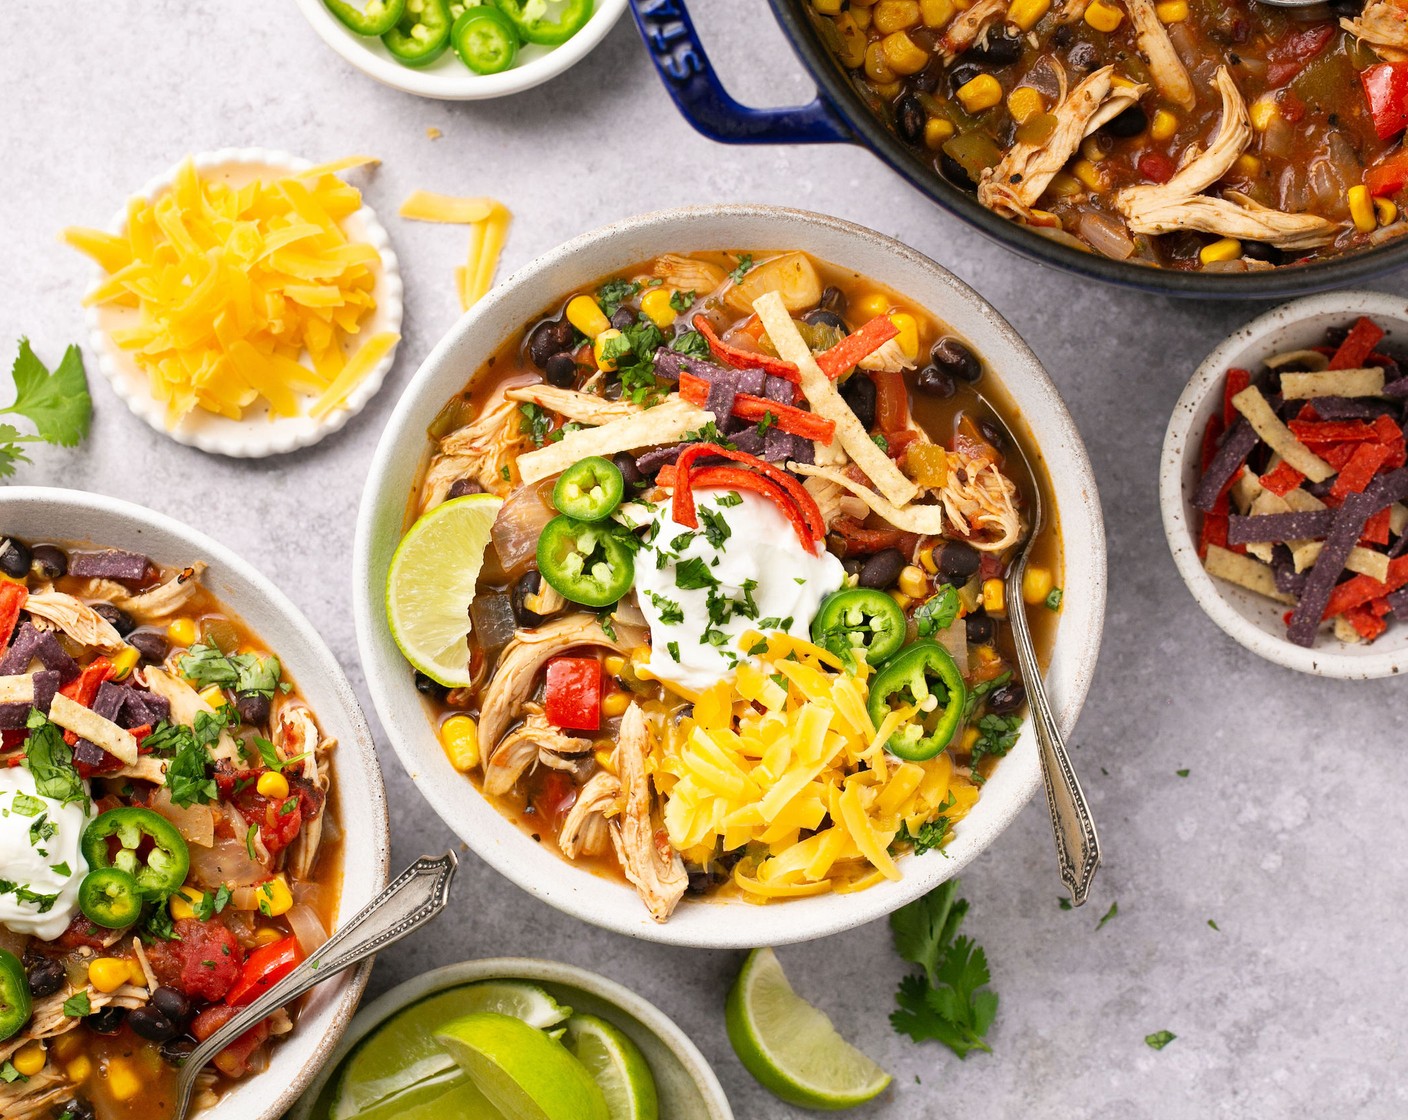 Quick and Easy Shredded Chicken Chili Recipe